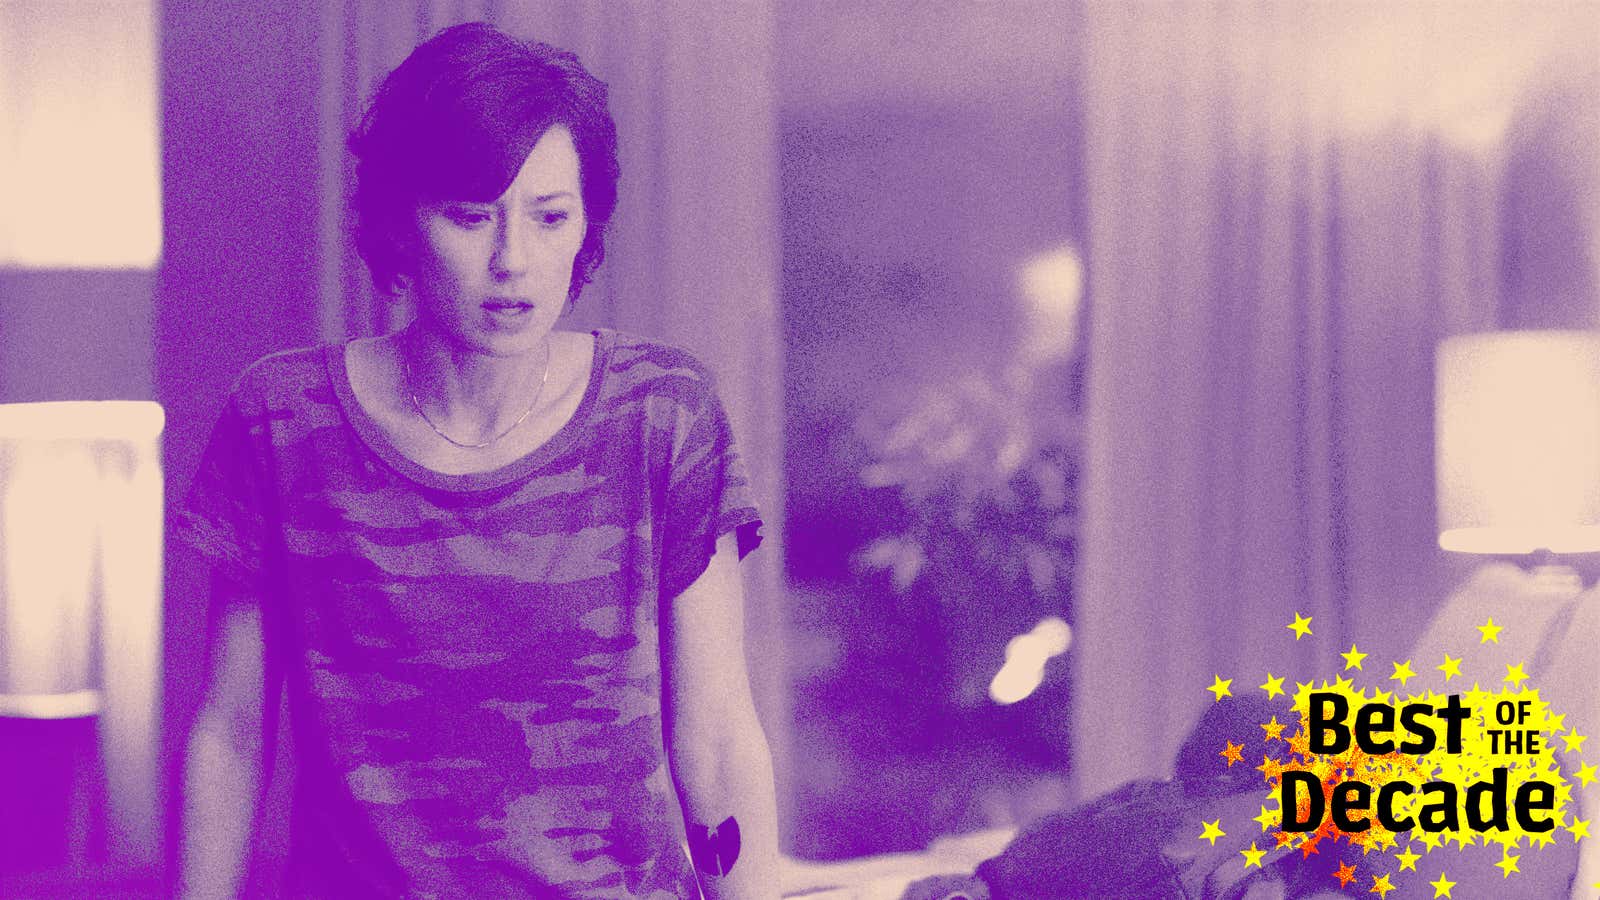 Our actor of the decade Carrie Coon tells all about <i>The Leftovers, </i>David Fincher, and more